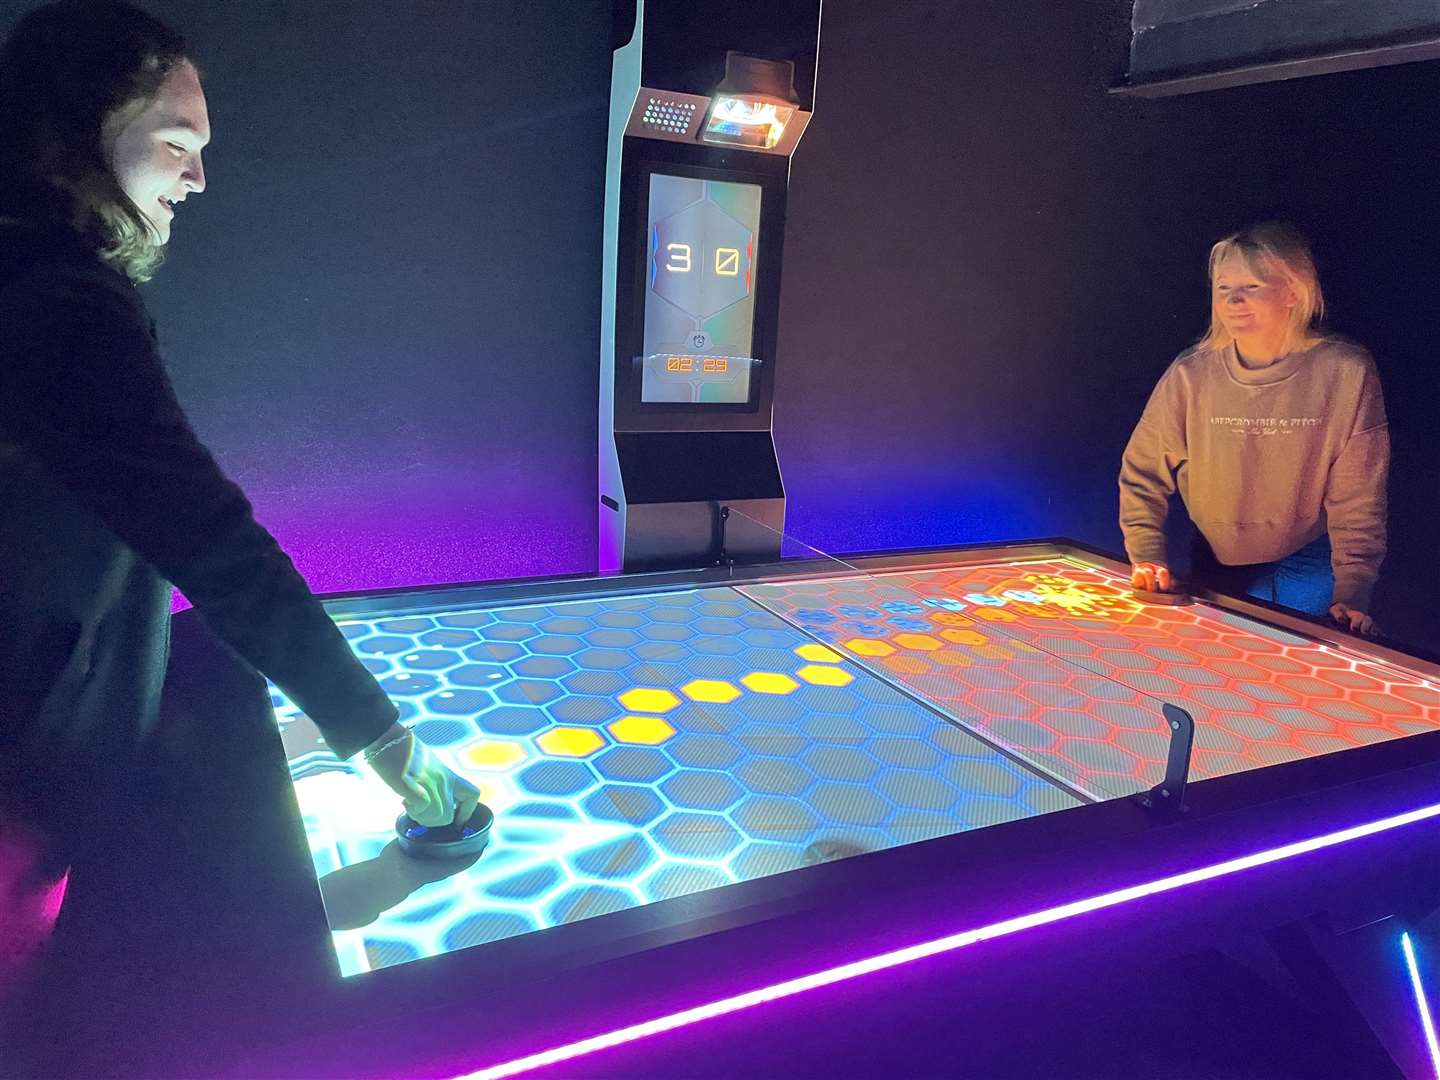 The augmented reality air hockey has loads of different game modes